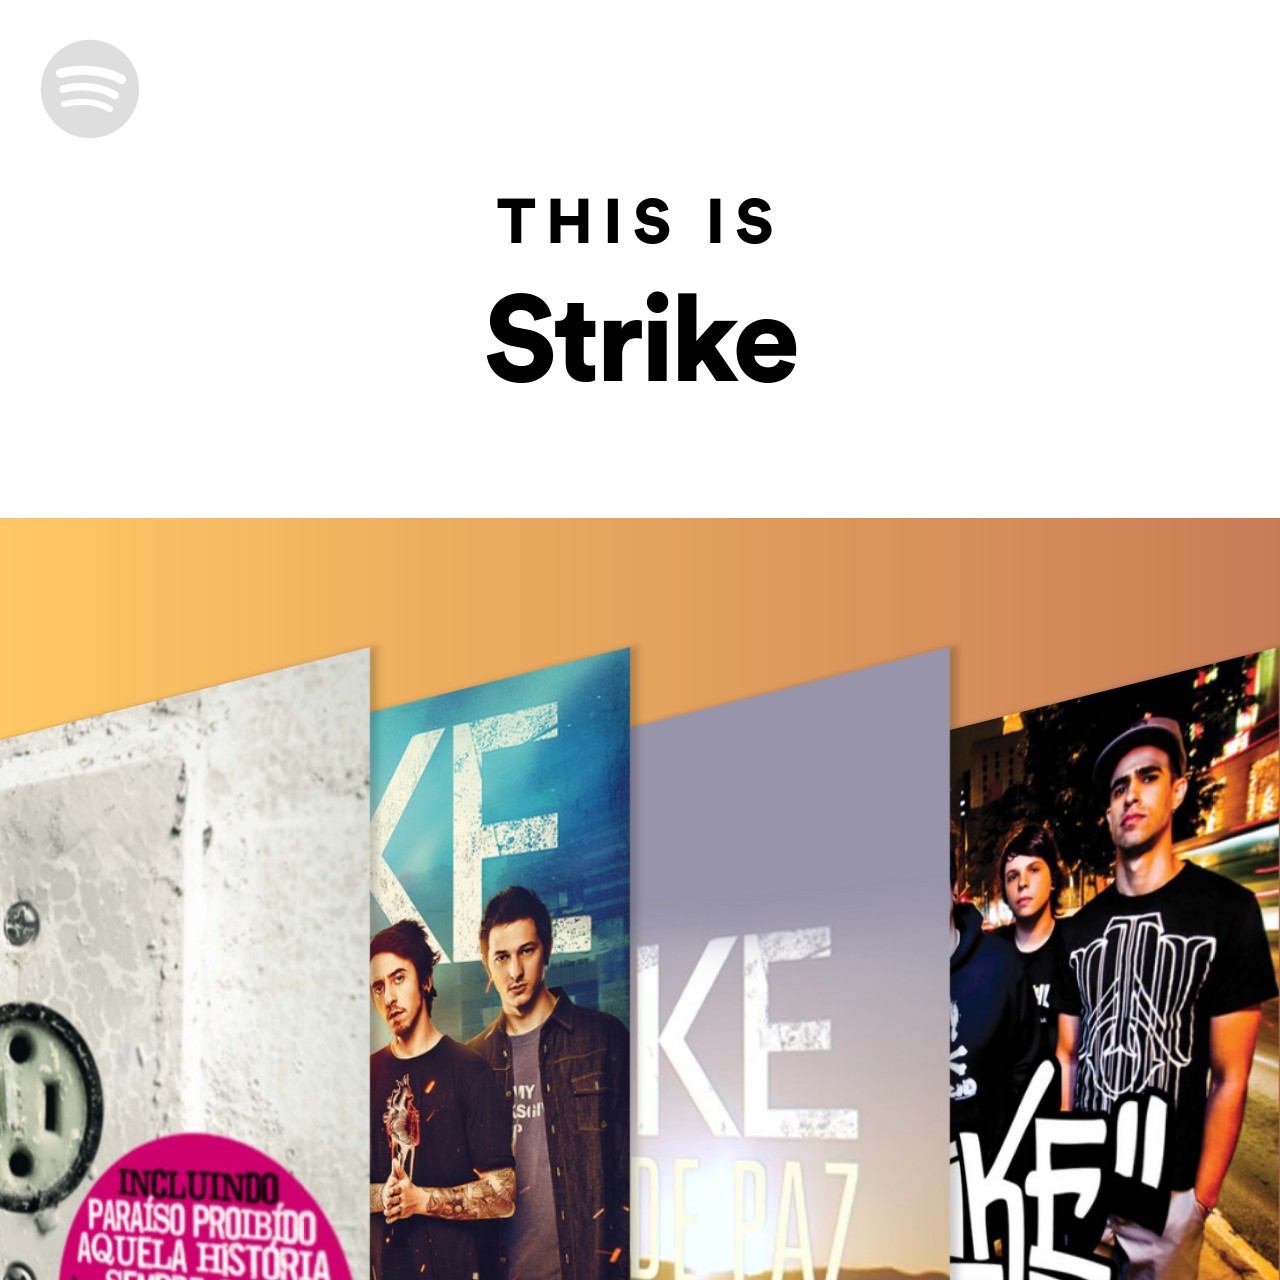 This Is Strike